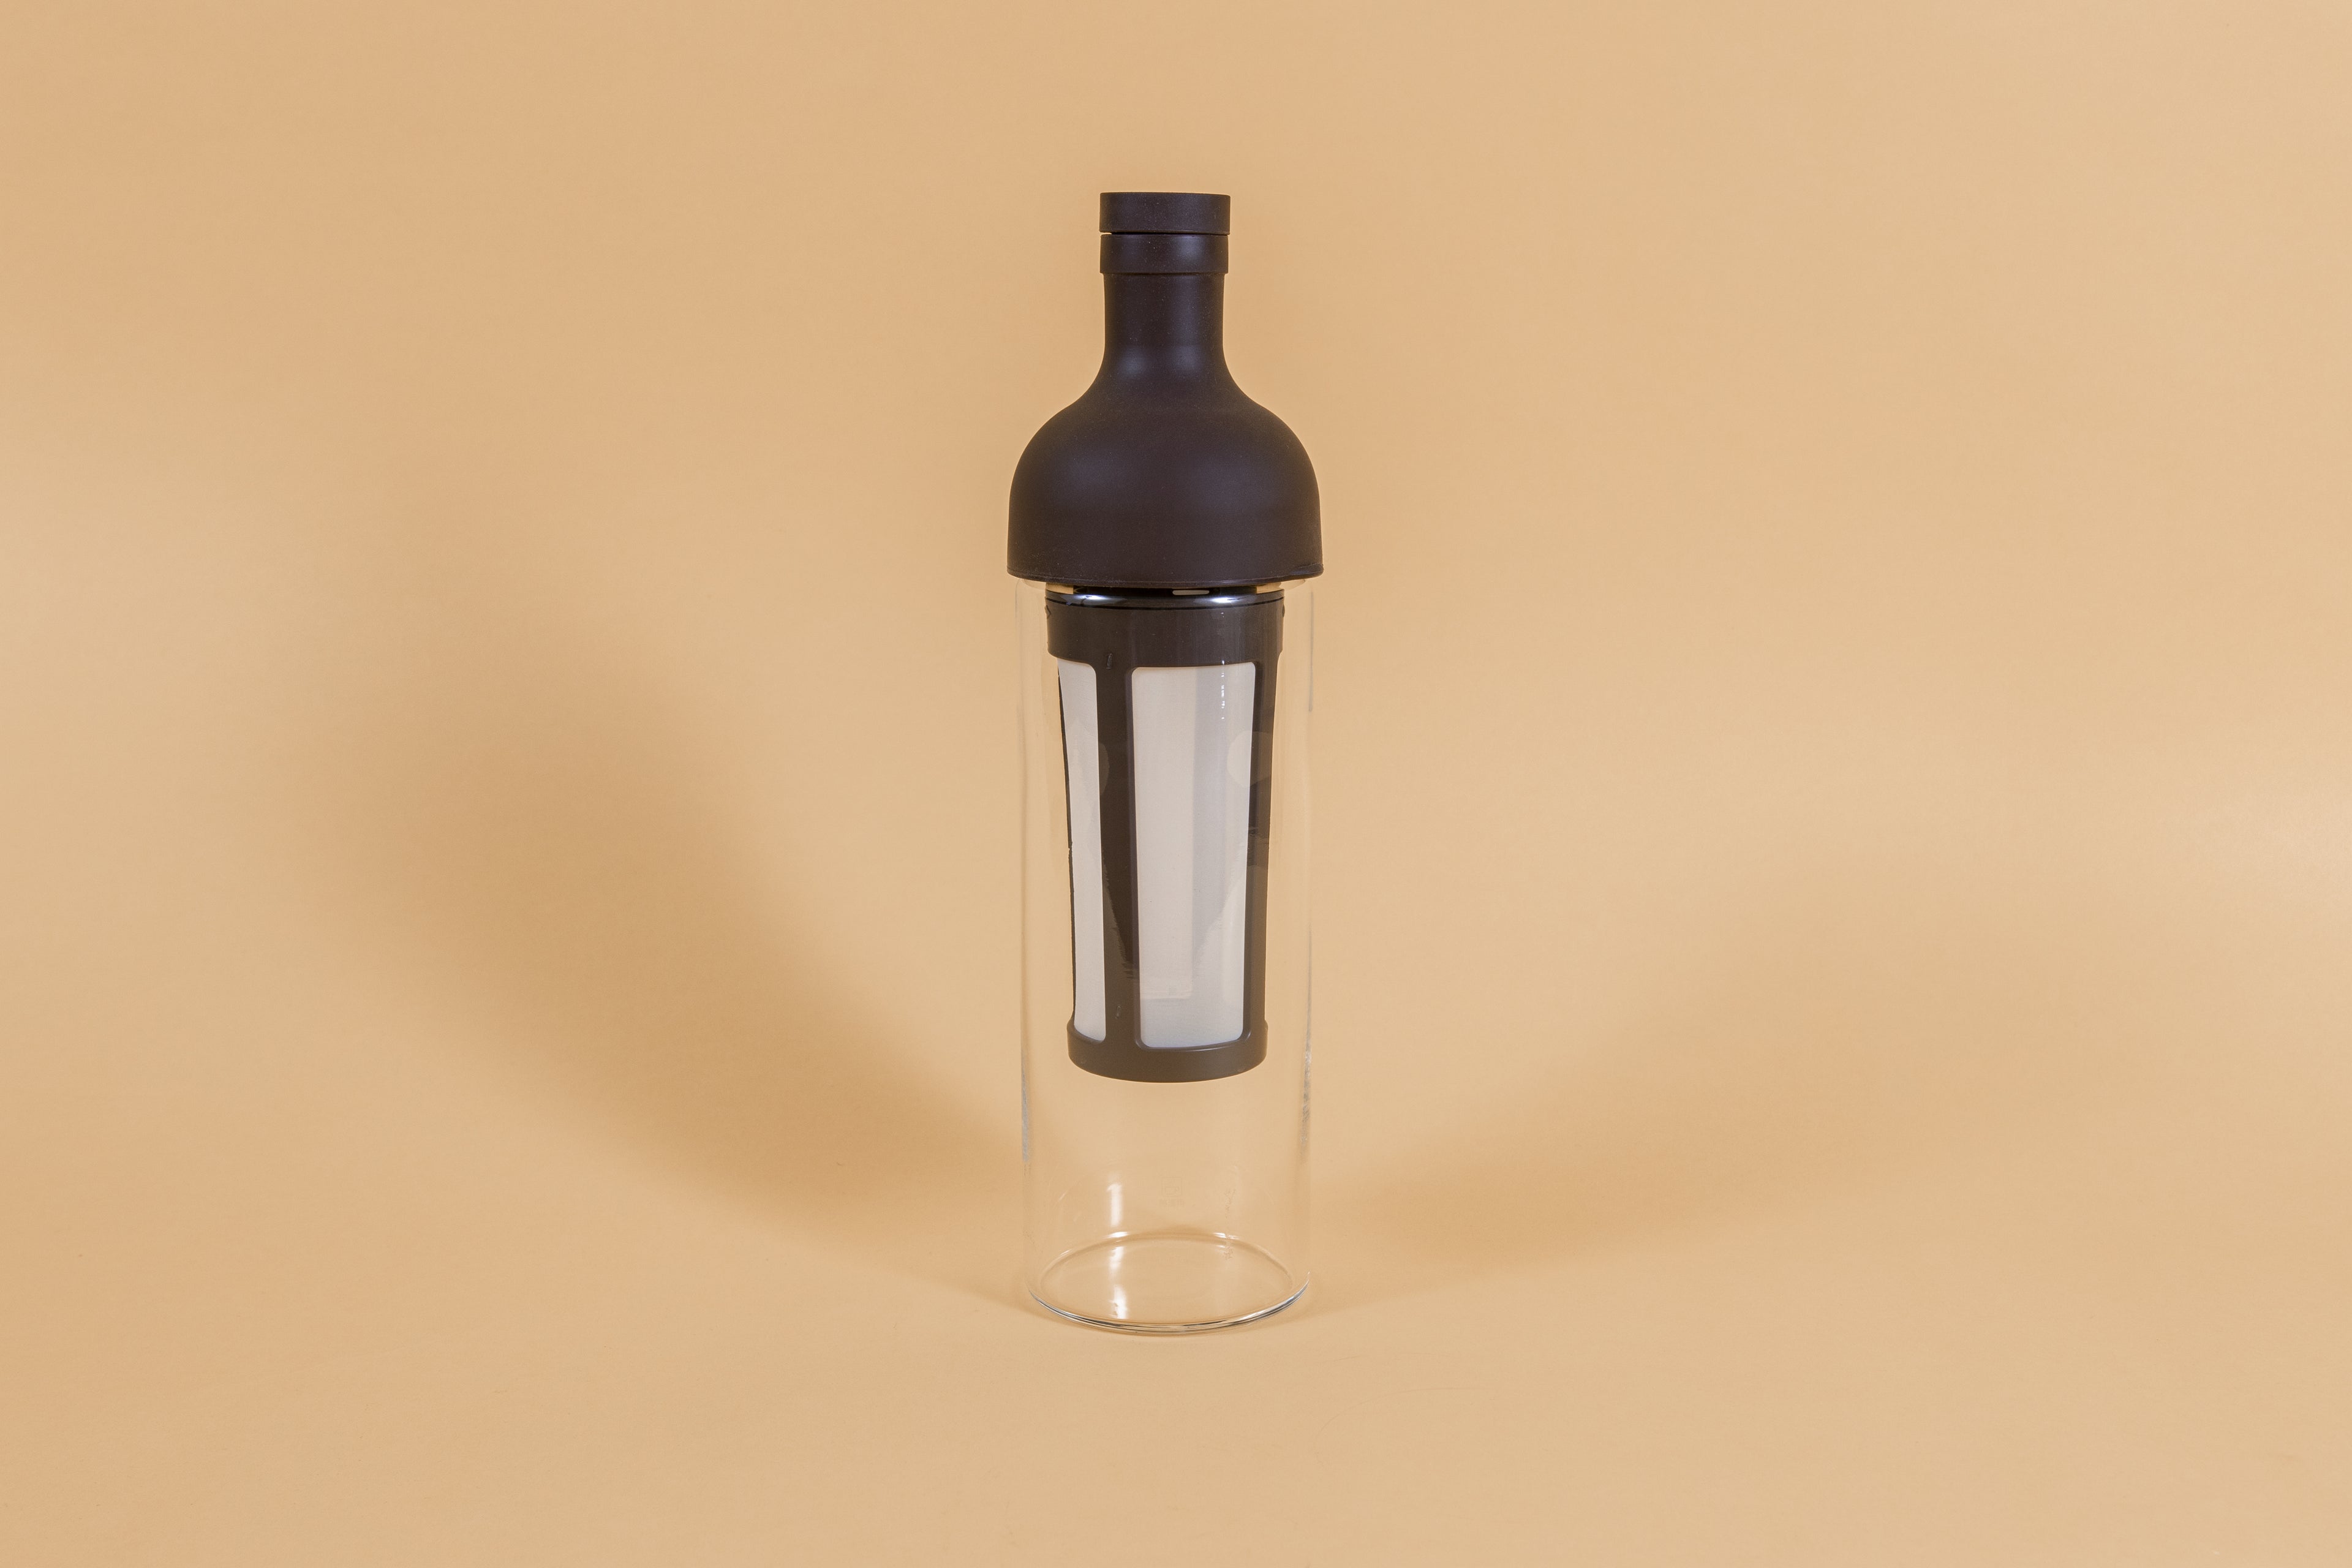 Tall glass container and white nylon mesh coffee filter, with brown rubber wine bottle shaped top on an orange backdrop.